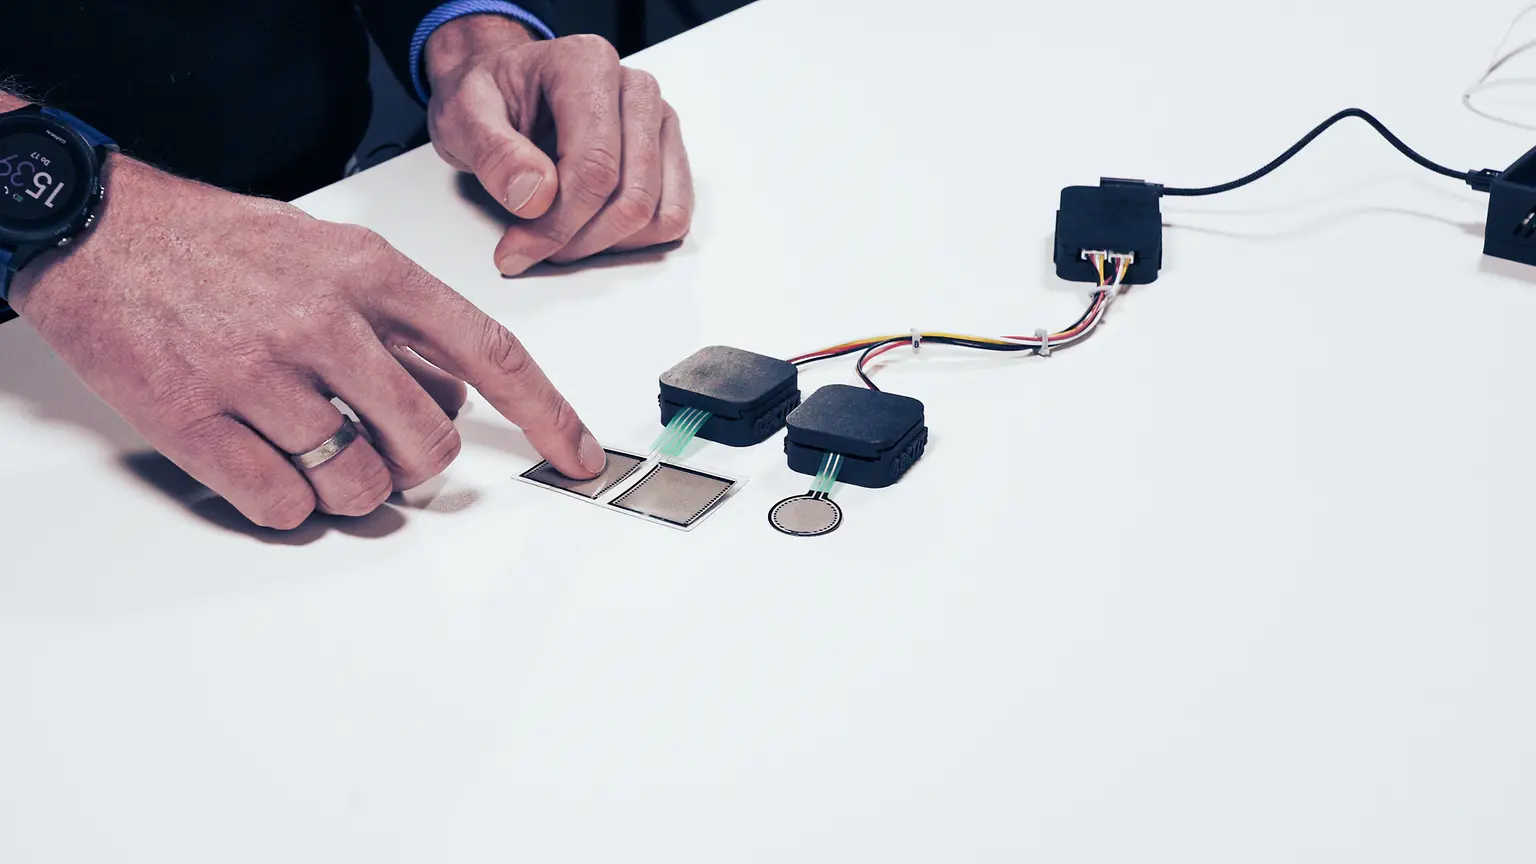 
The Sensor INKxperience Kit offers IOT engineers the possibility to explore the potentials of printed electronics for the development of new sensor solutions.